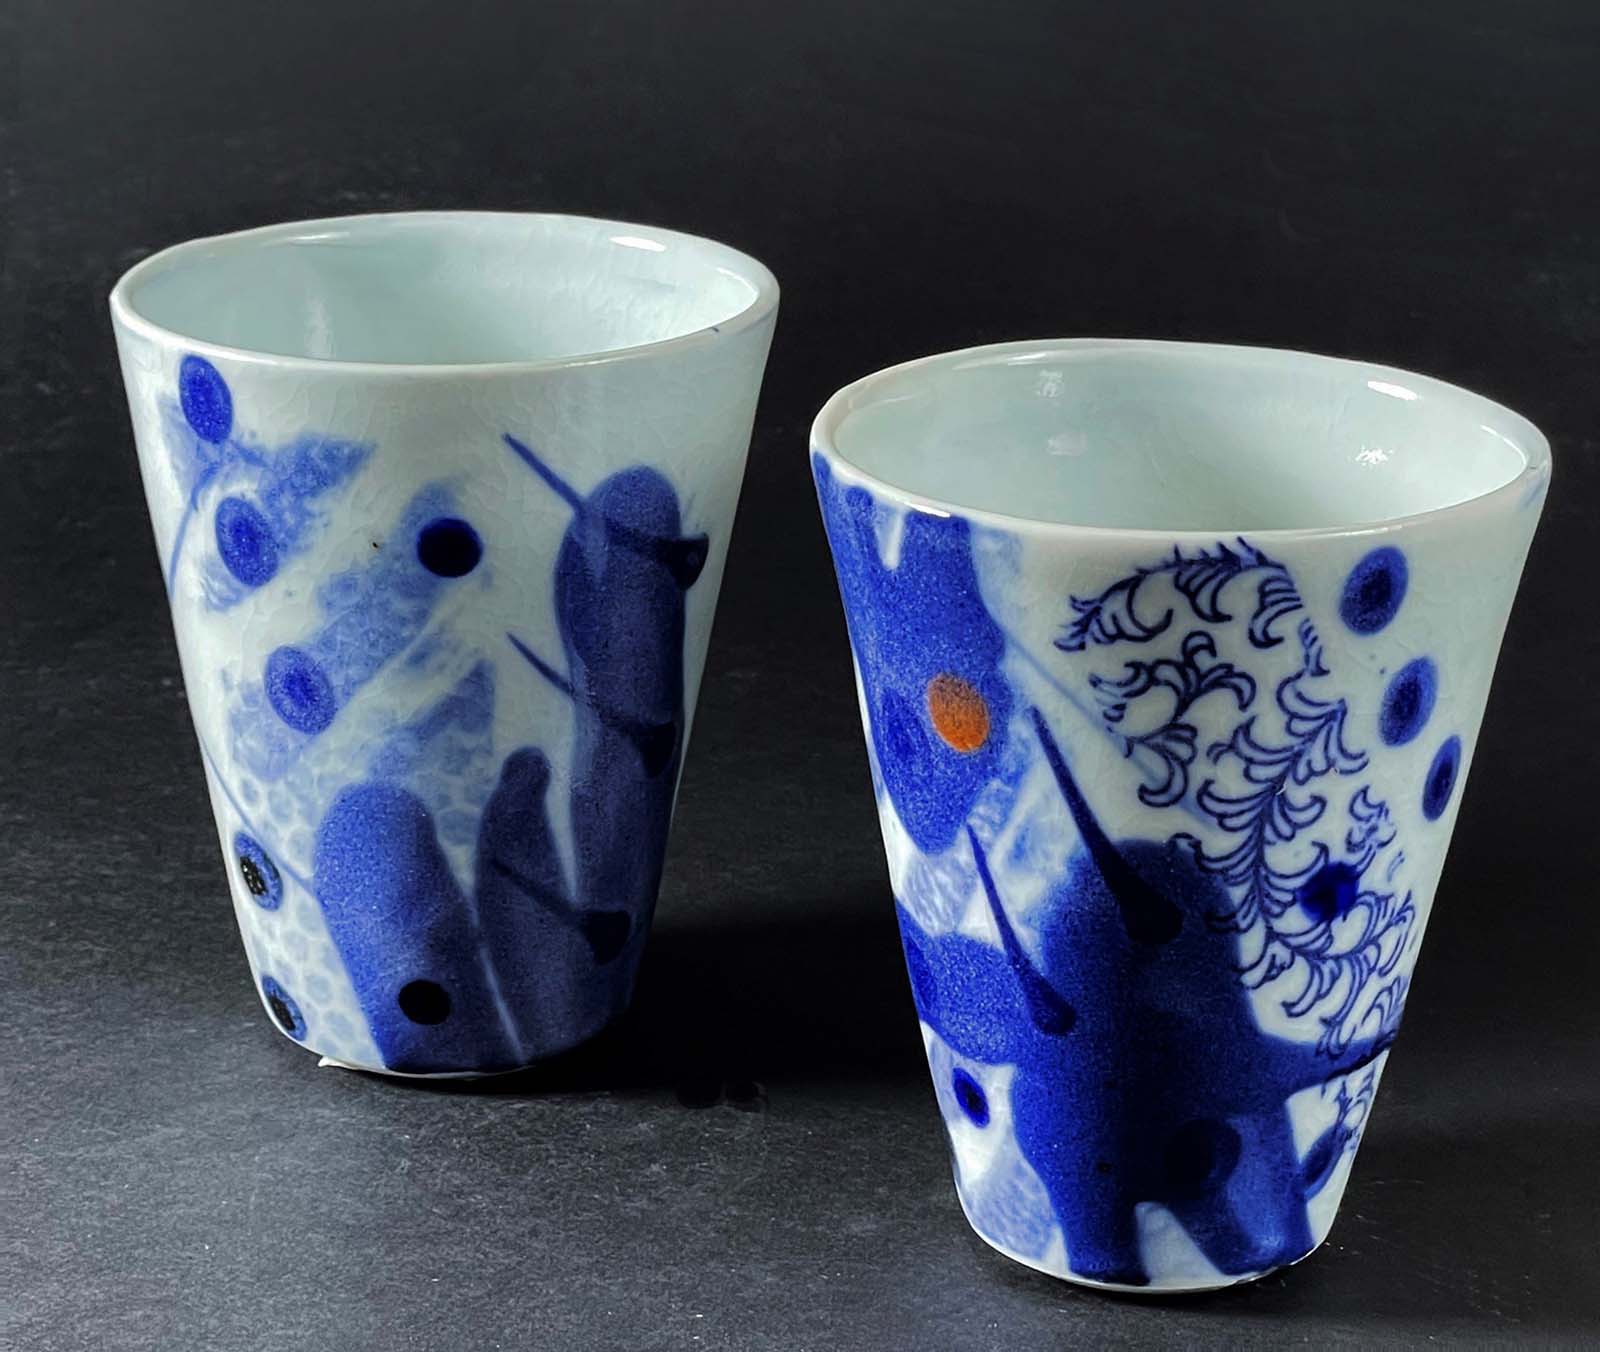 Andrew Matheson, large and small porcelain beakers, fired in reduction to 2336°F (1280°C).